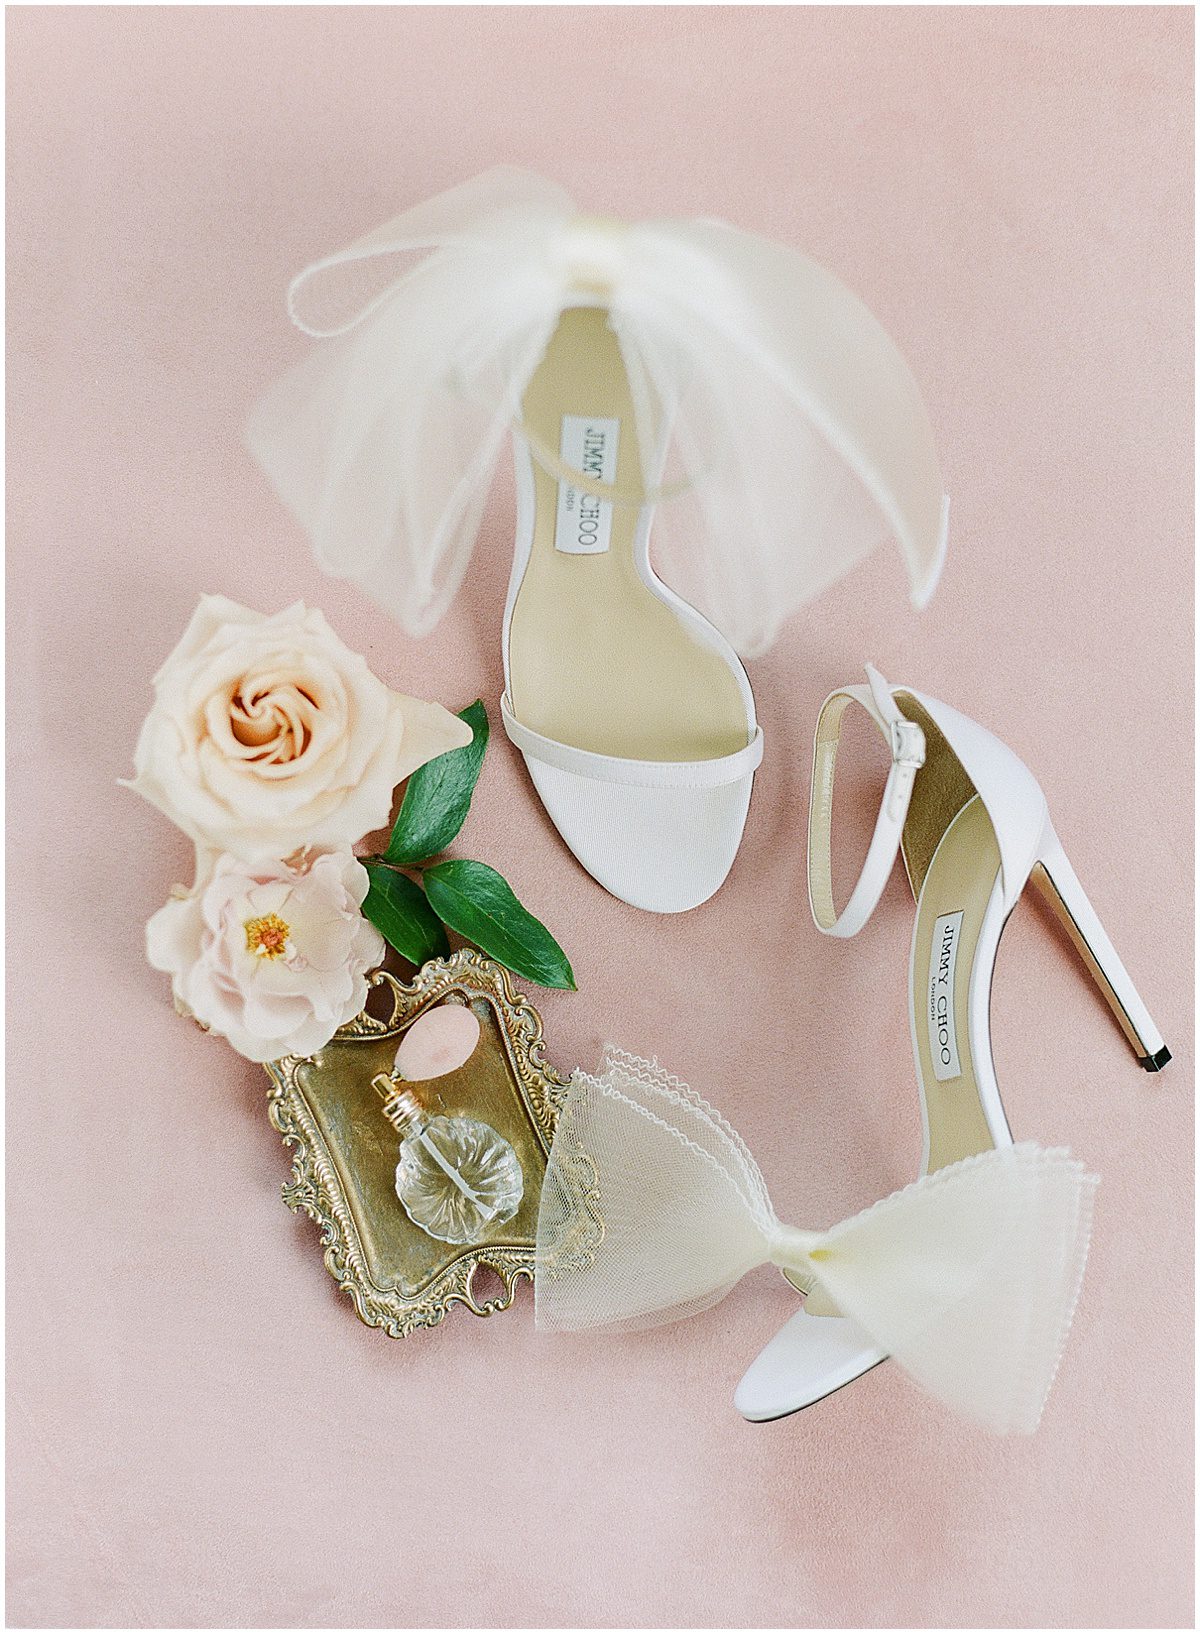 White Jimmy Choo Heels with a Bottle of Perfume and Flowers Photo